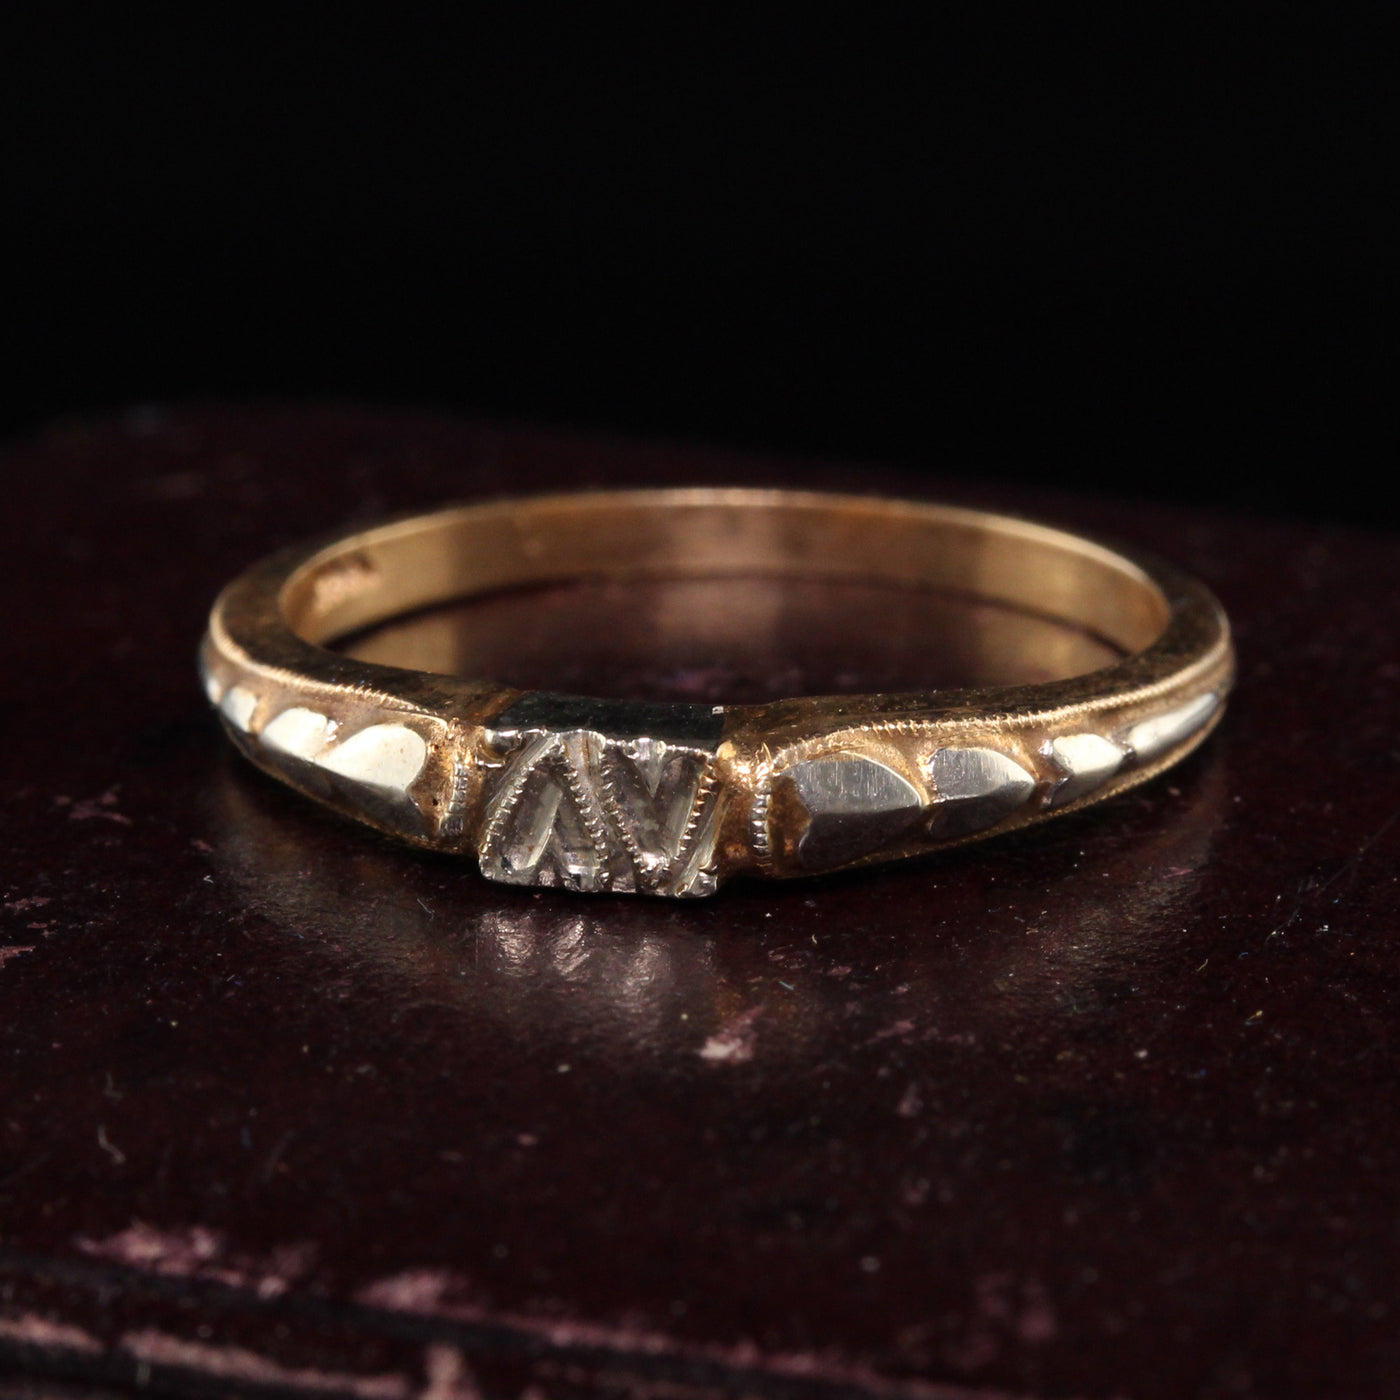 Antique Art Deco 14K Yellow Gold Two Tone Engraved Heart Wedding Band